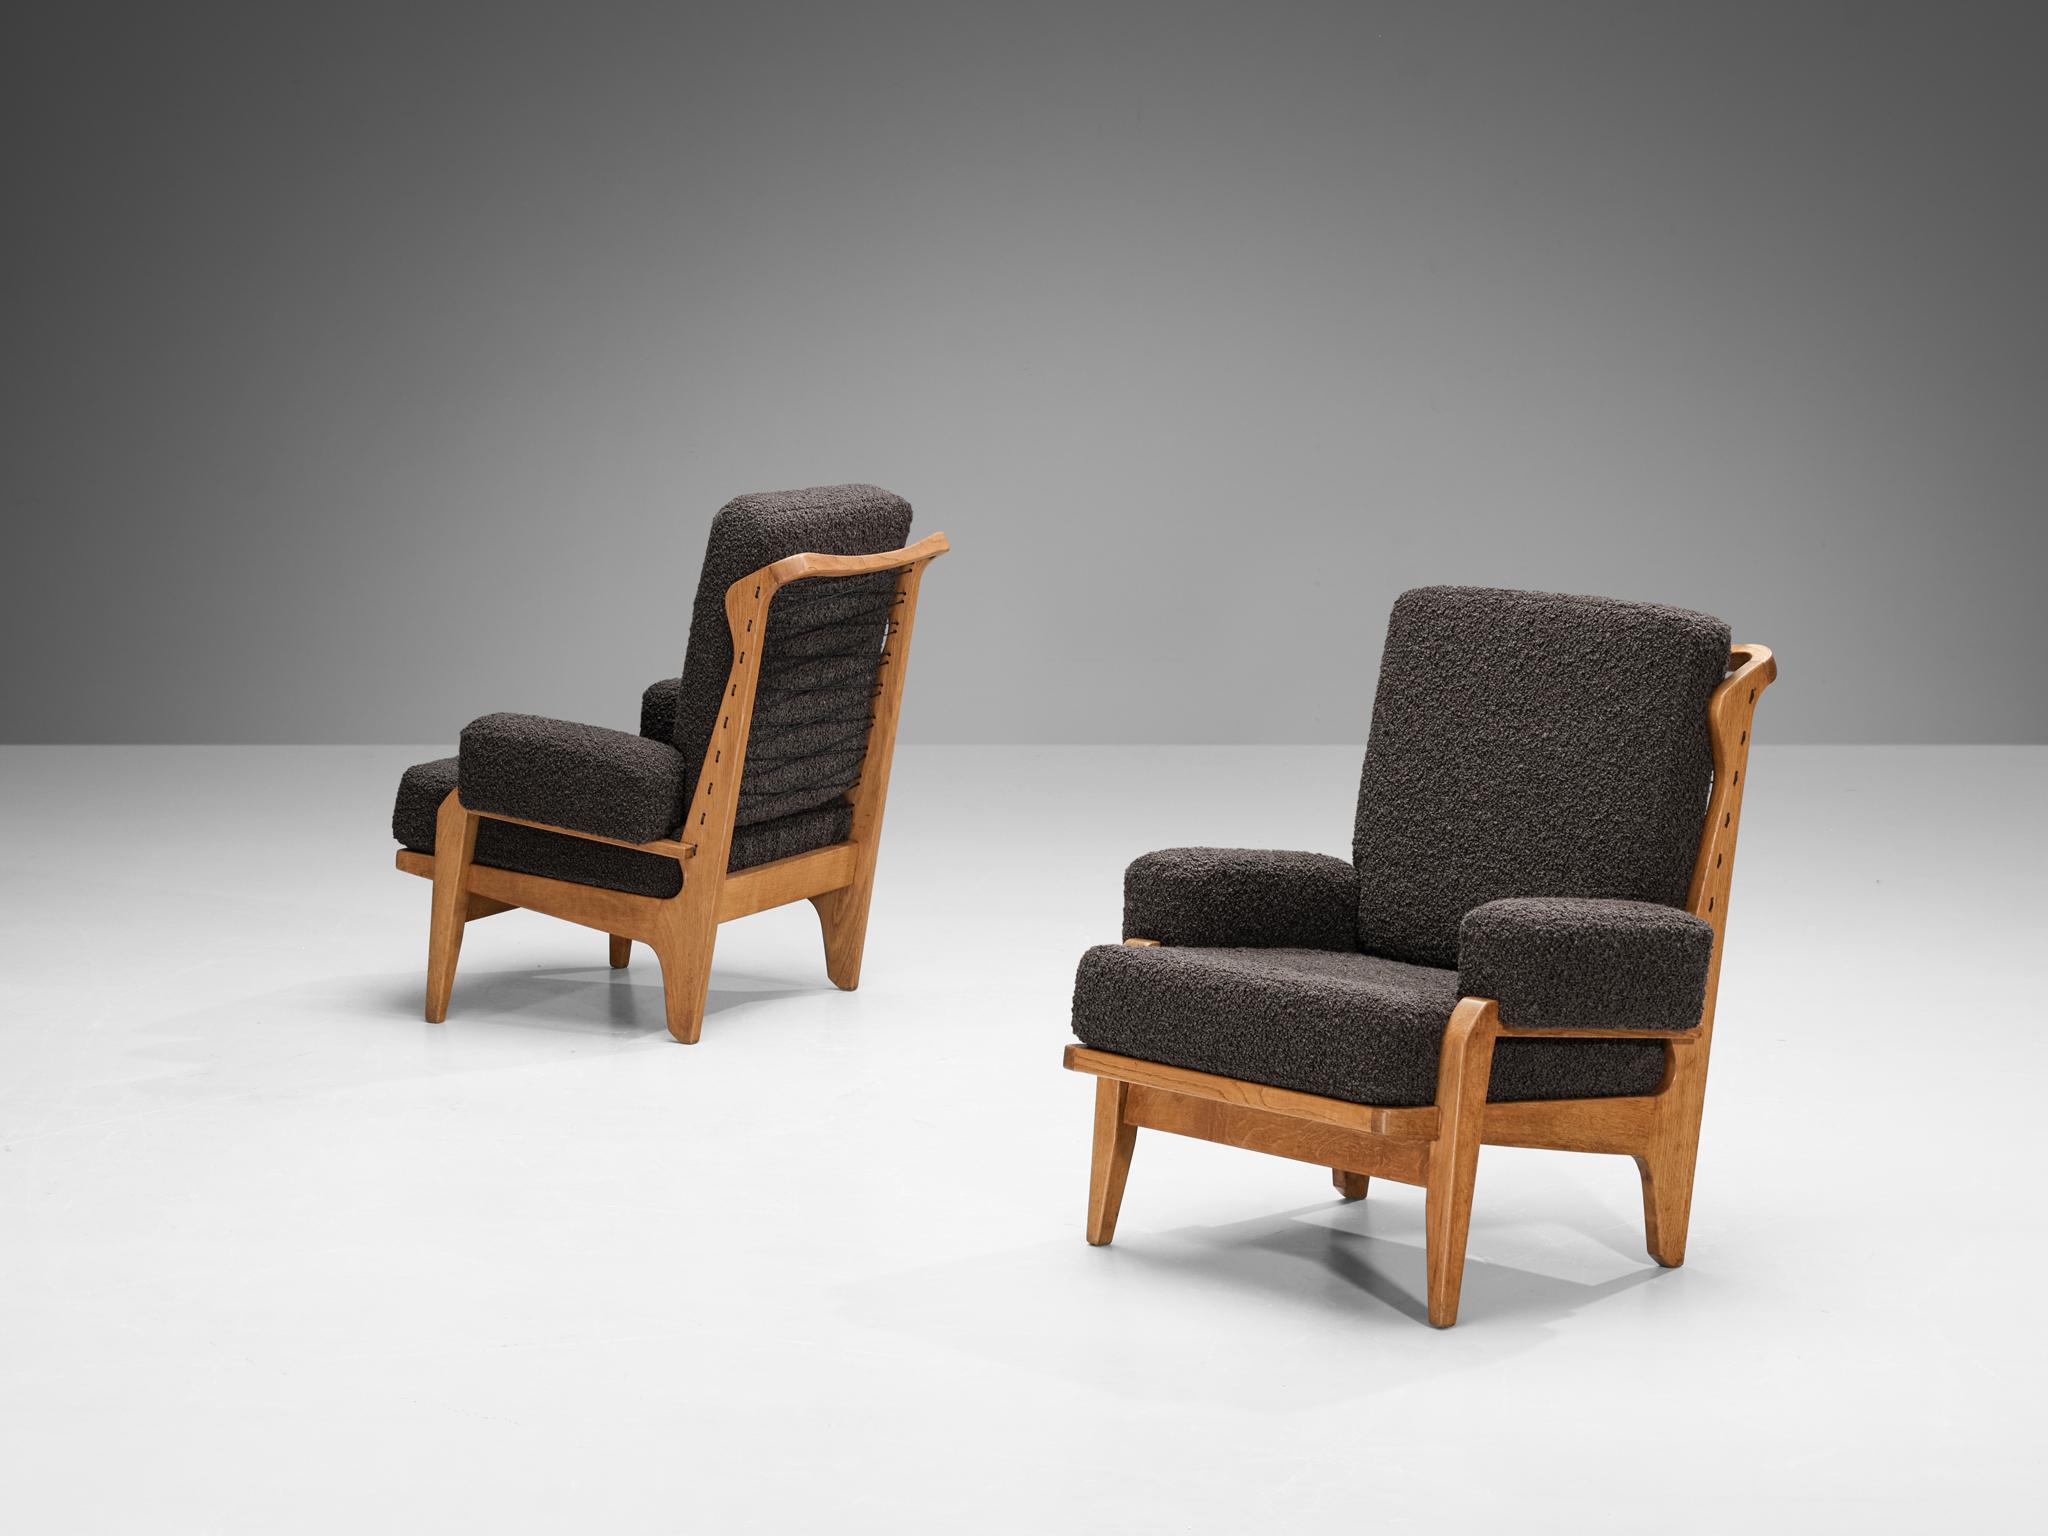 Guillerme & Chambron for Votre Maison, pair of 'Scoubidou' lounge chairs, oak, reupholstered in Dedar wool bouclé, France, 1960s

A great pair of comfortable armchairs with high backs designed by Guillerme & Chambron. These chairs have very